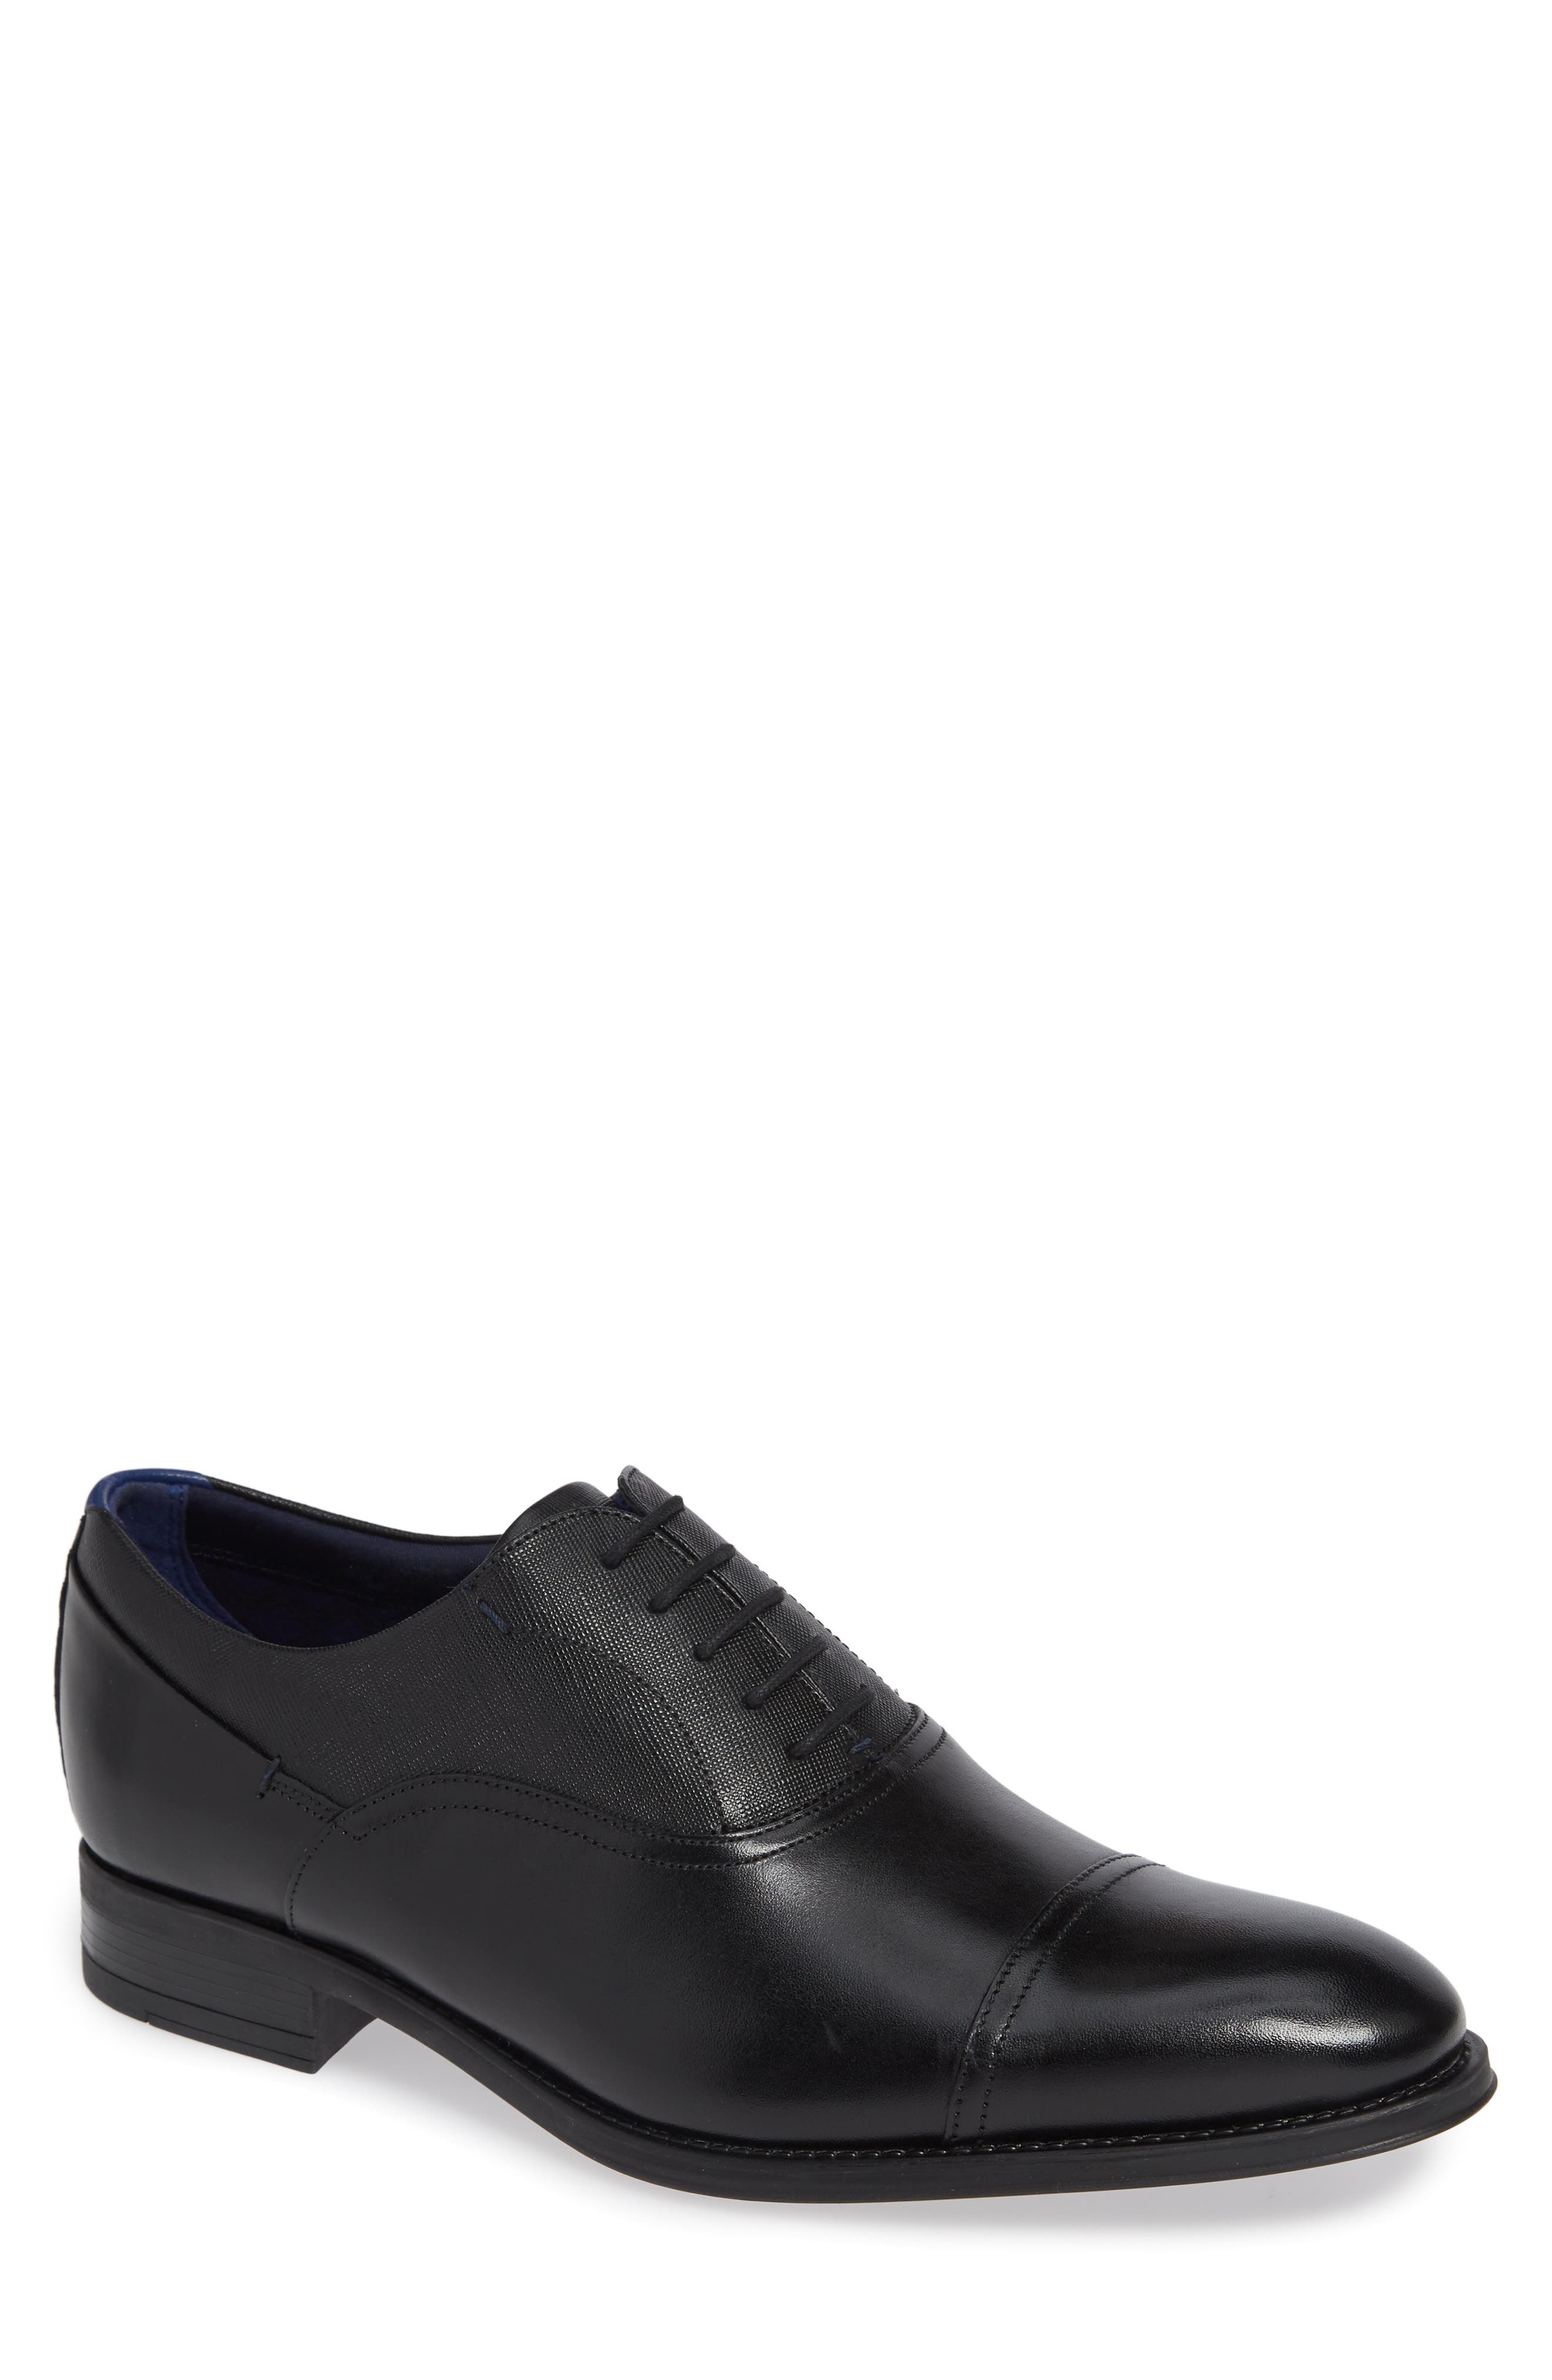 Ted Baker London Fhares Cap Toe Oxford 